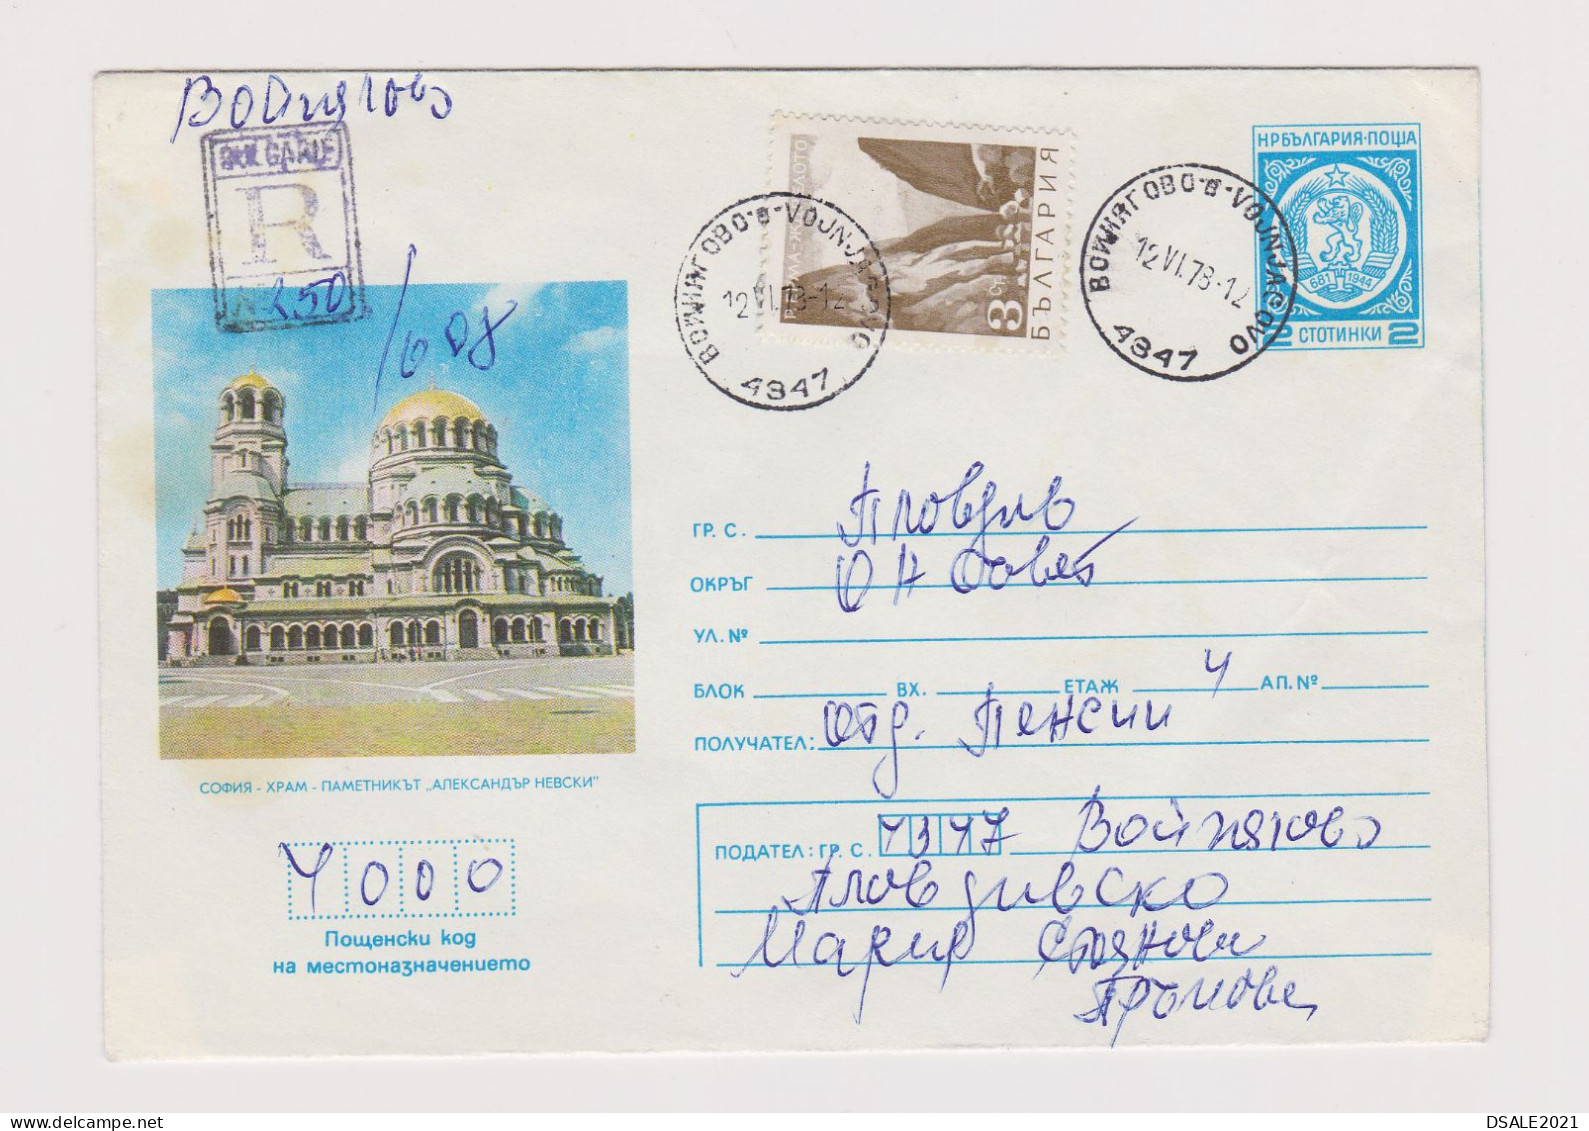 Bulgaria Bulgarien Bulgarie 1978 Registered Postal Stationery Cover PSE W/Topic Stamp, Entier, SOFIA-Church (66398) - Covers